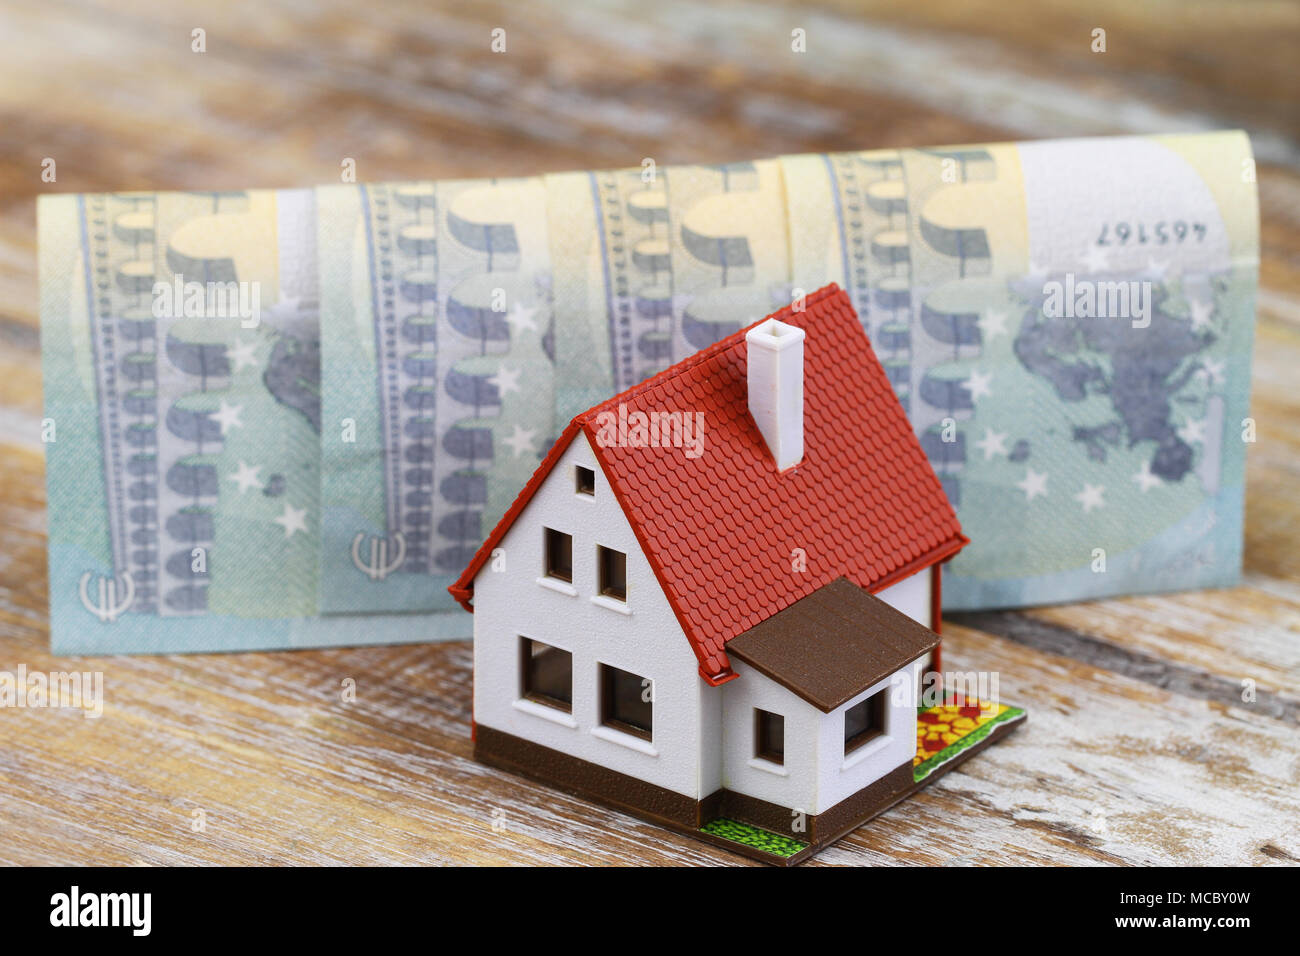 Model house in front of folded Euro banknotes on wooden surface Stock Photo